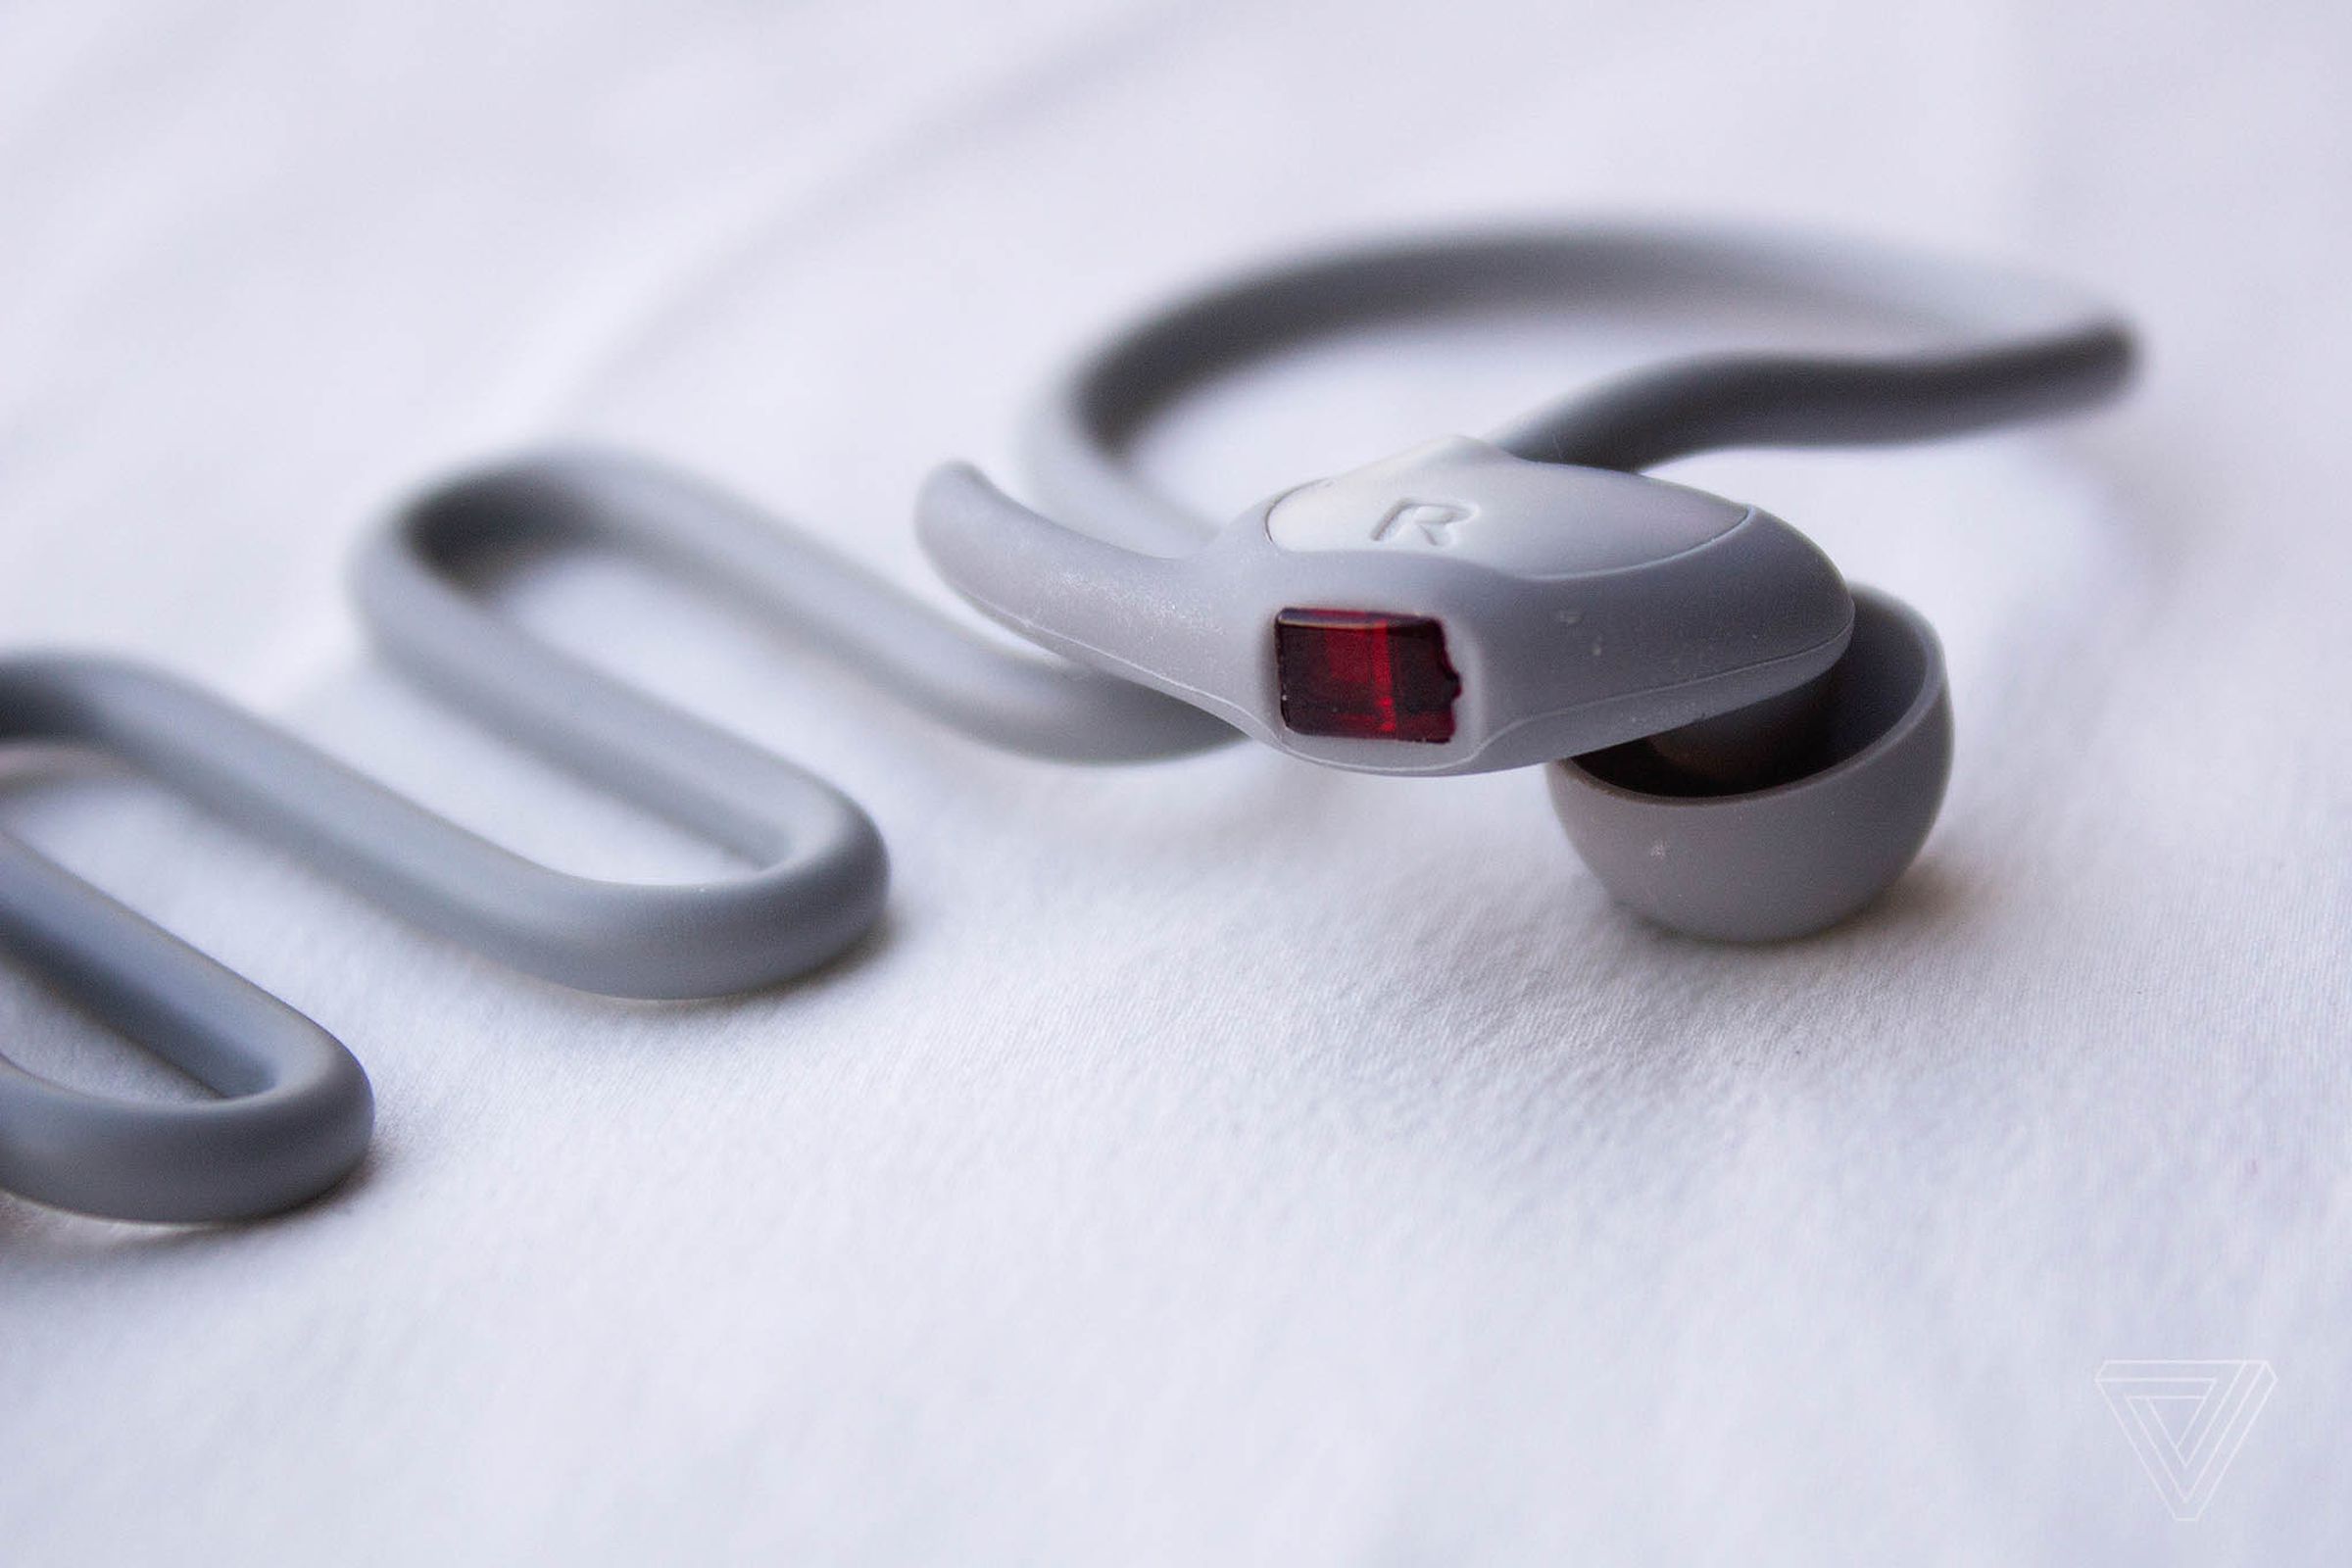 The optical heart rate sensor is located in the right earbud.